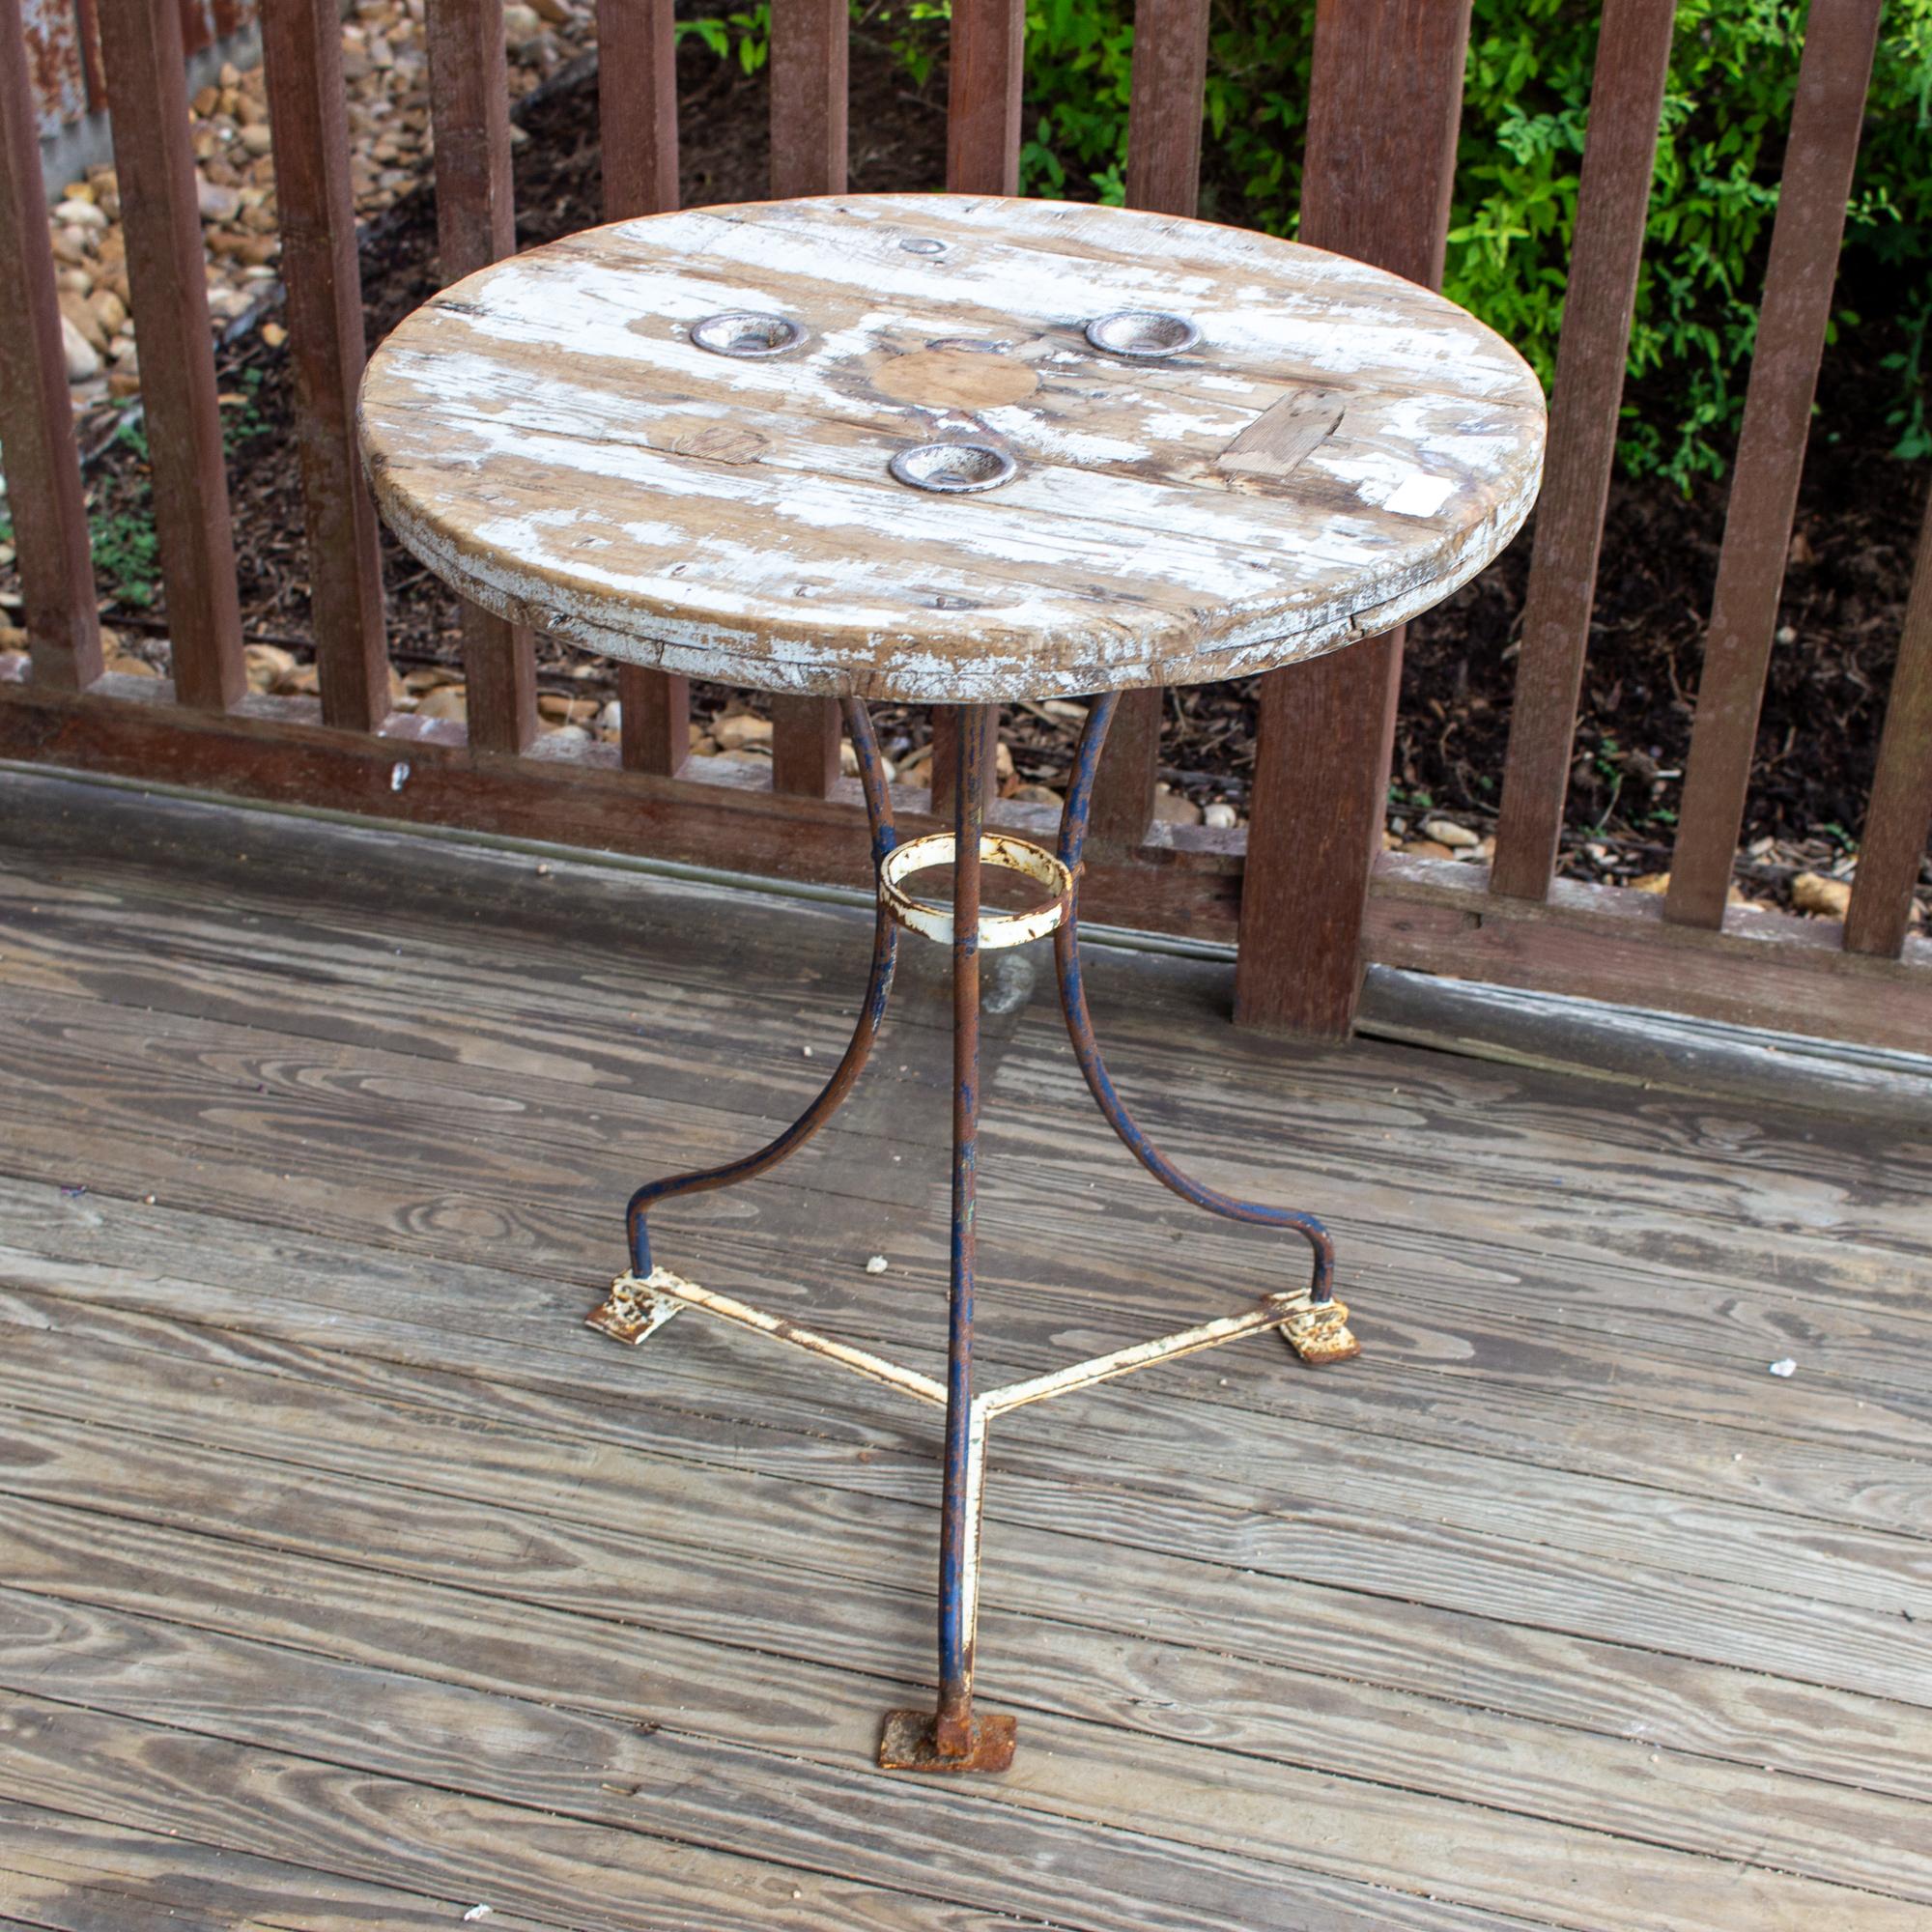 This charmingly rustic wood & metal bistro table was sourced in Spain. The top is wood with three round metal rivets which are attached to the metal base. The wood has a distressed painted finish with the remnants of white paint, also echoed on the